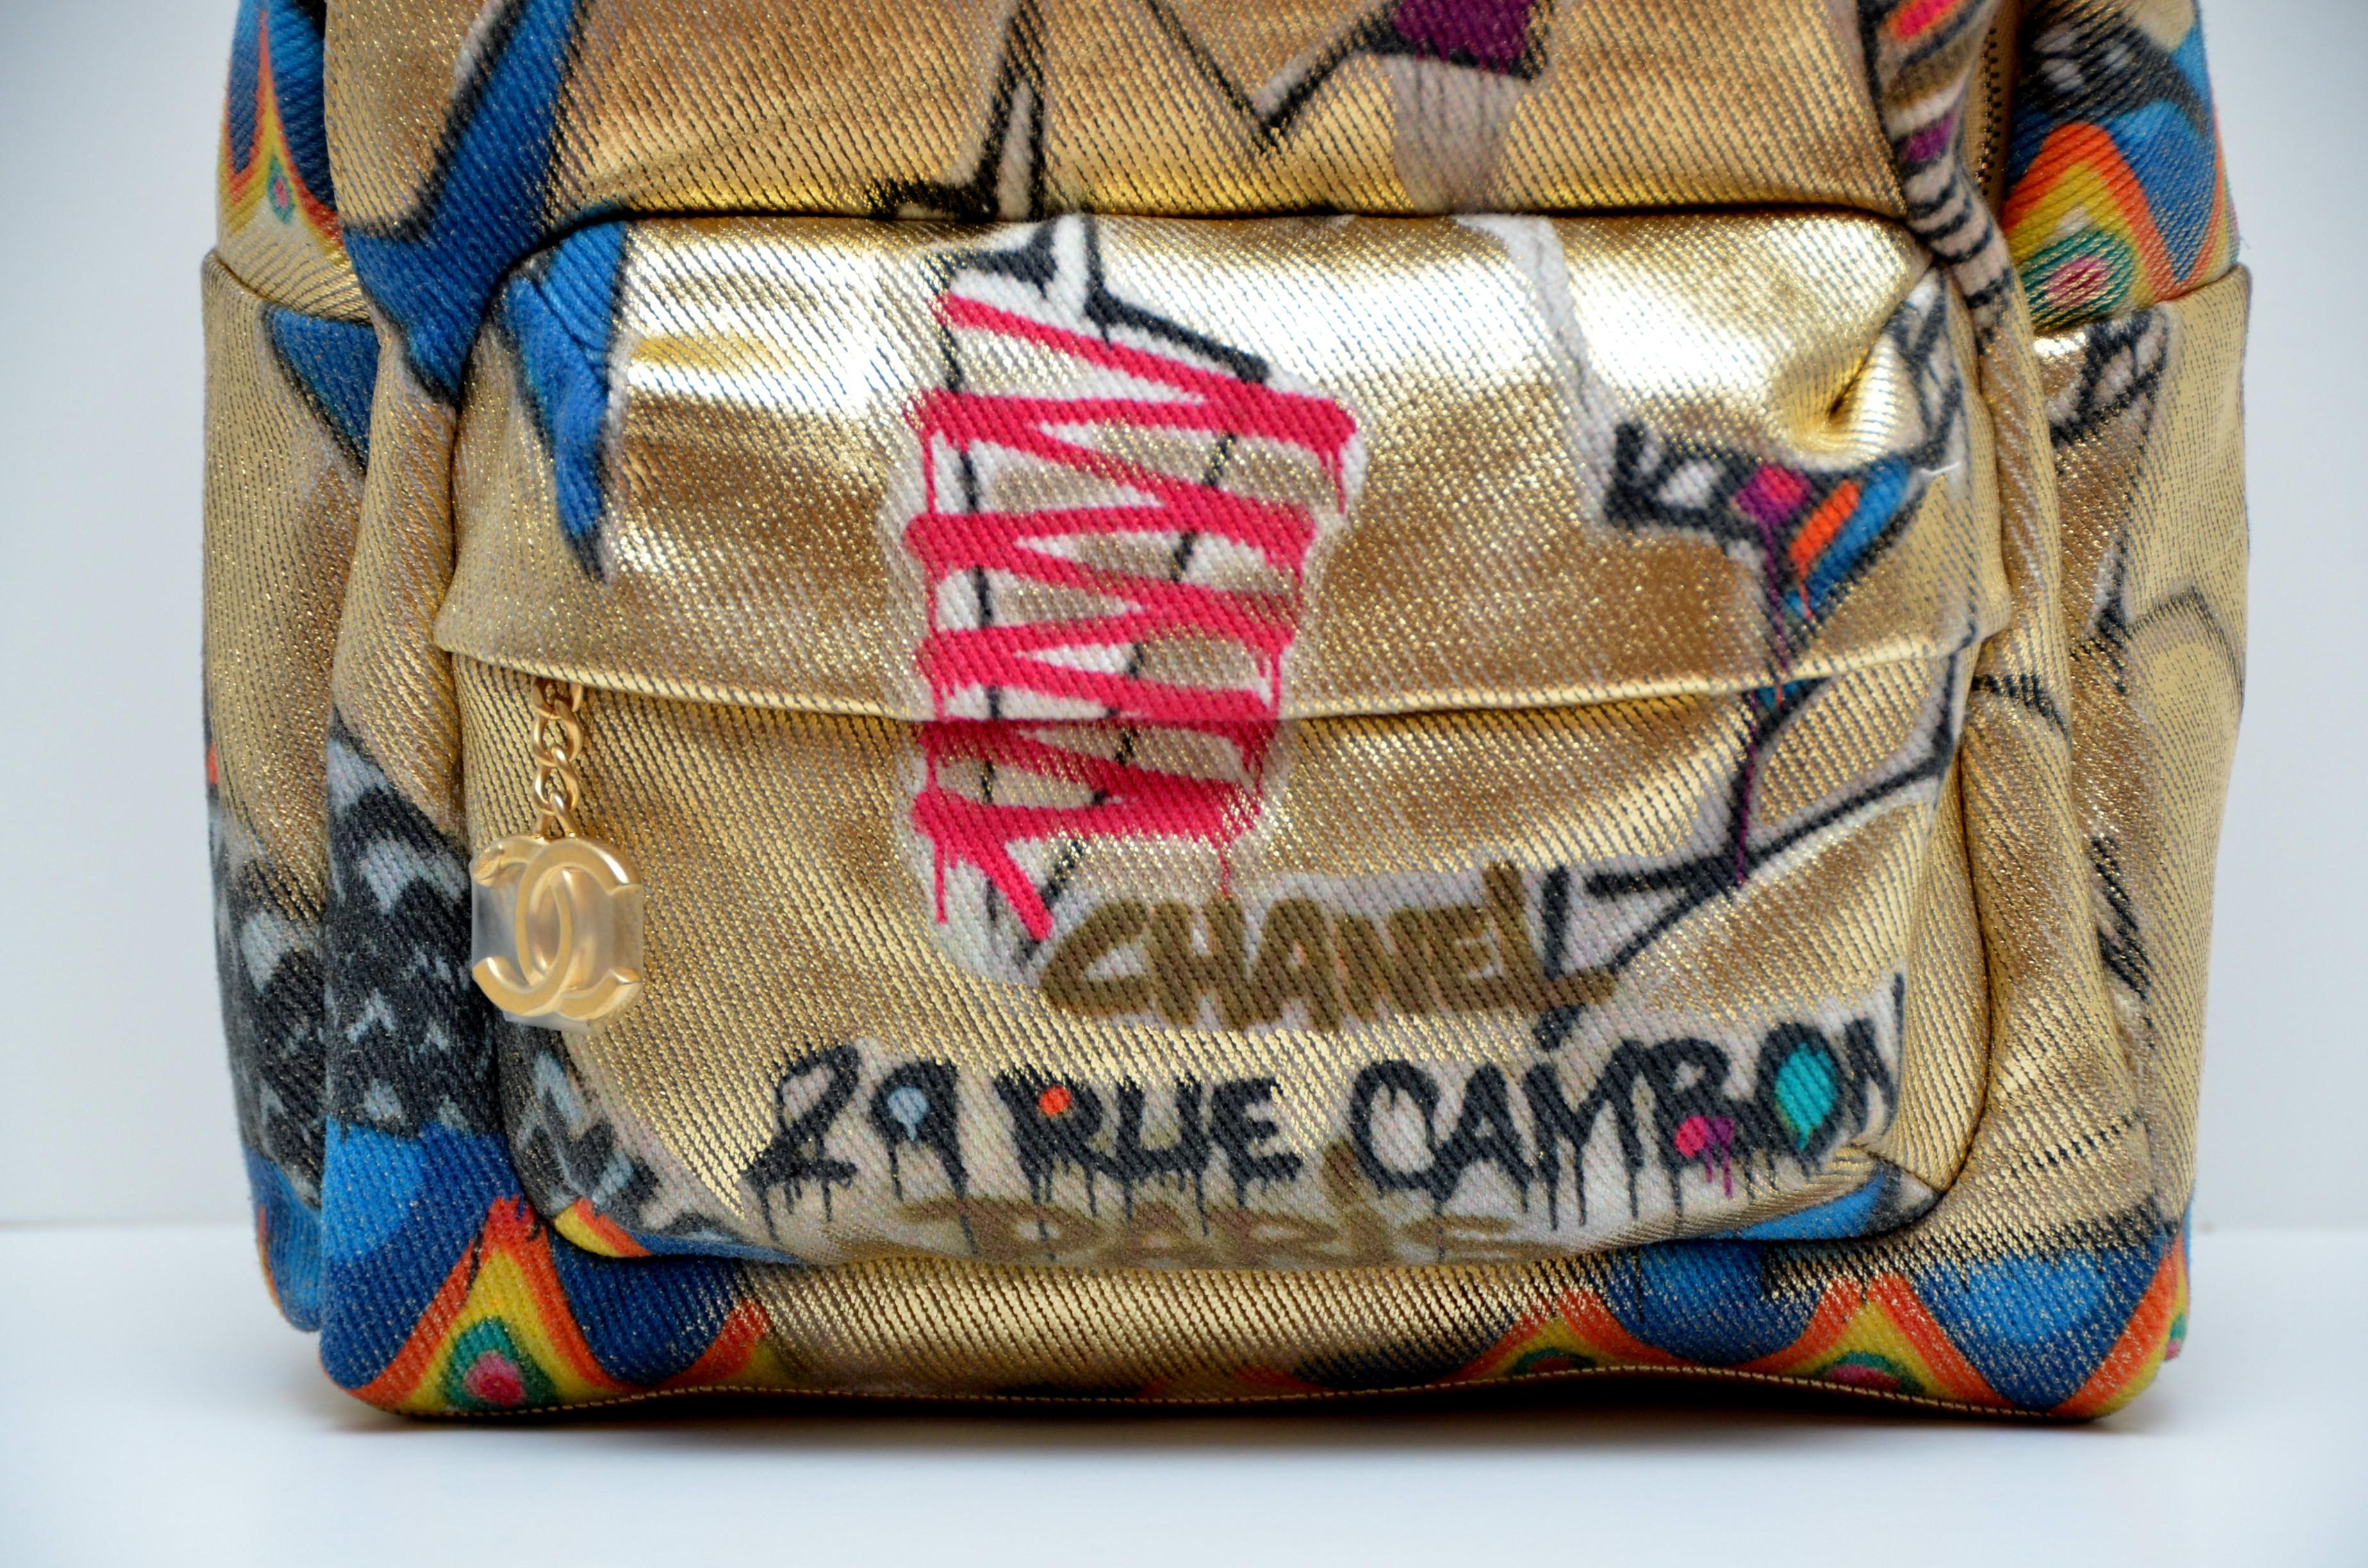 backpack with gold tag